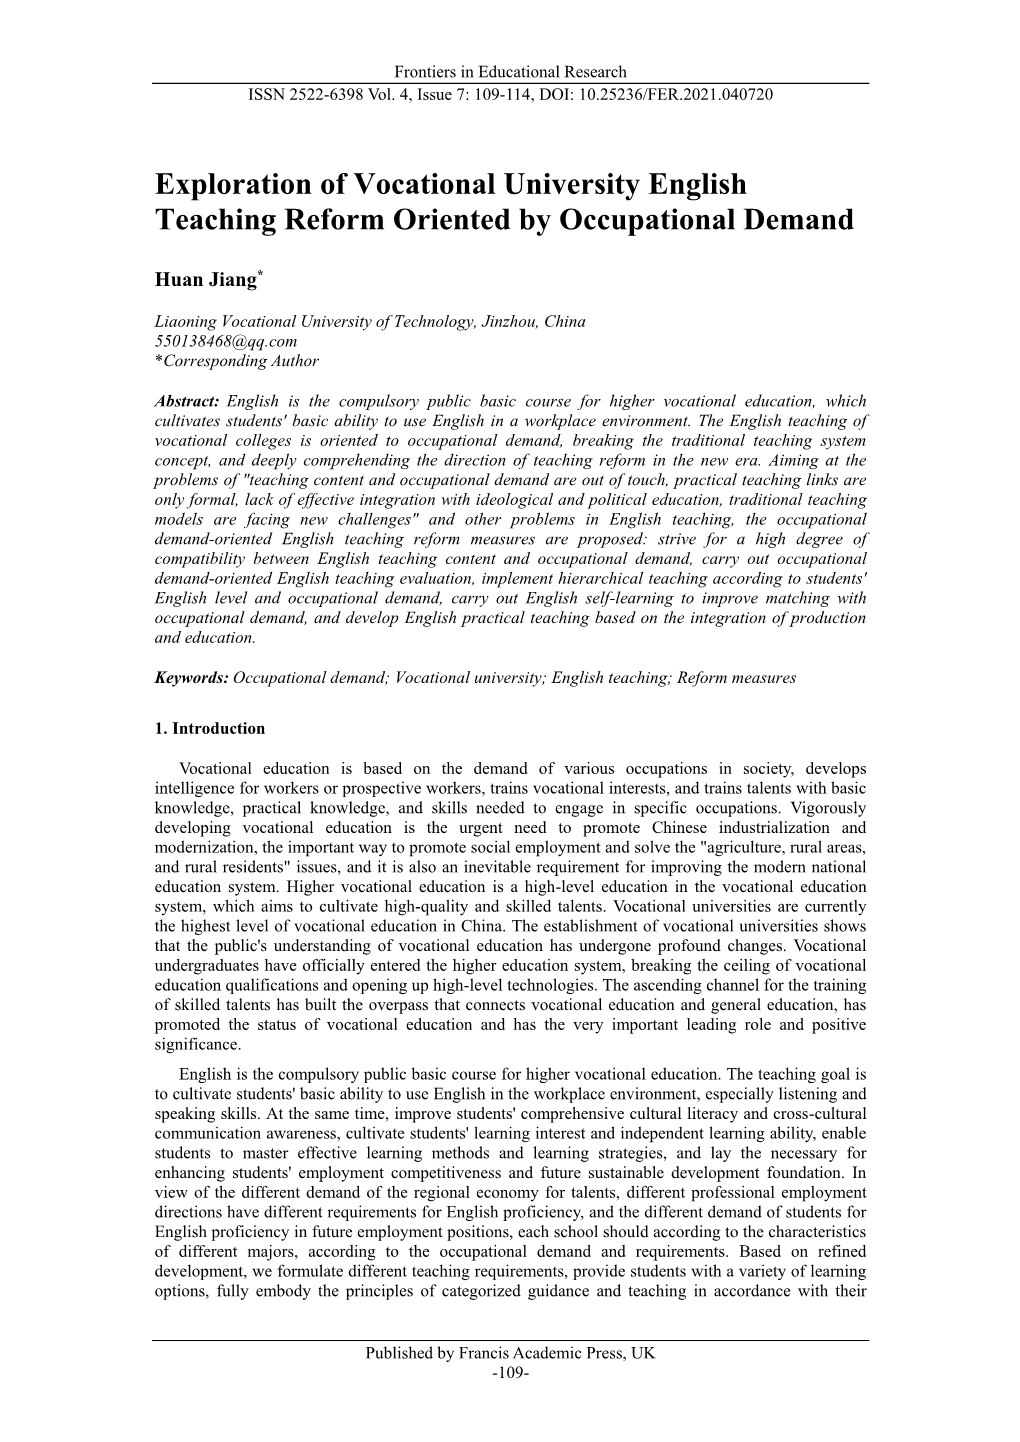 Exploration of Vocational University English Teaching Reform Oriented by Occupational Demand